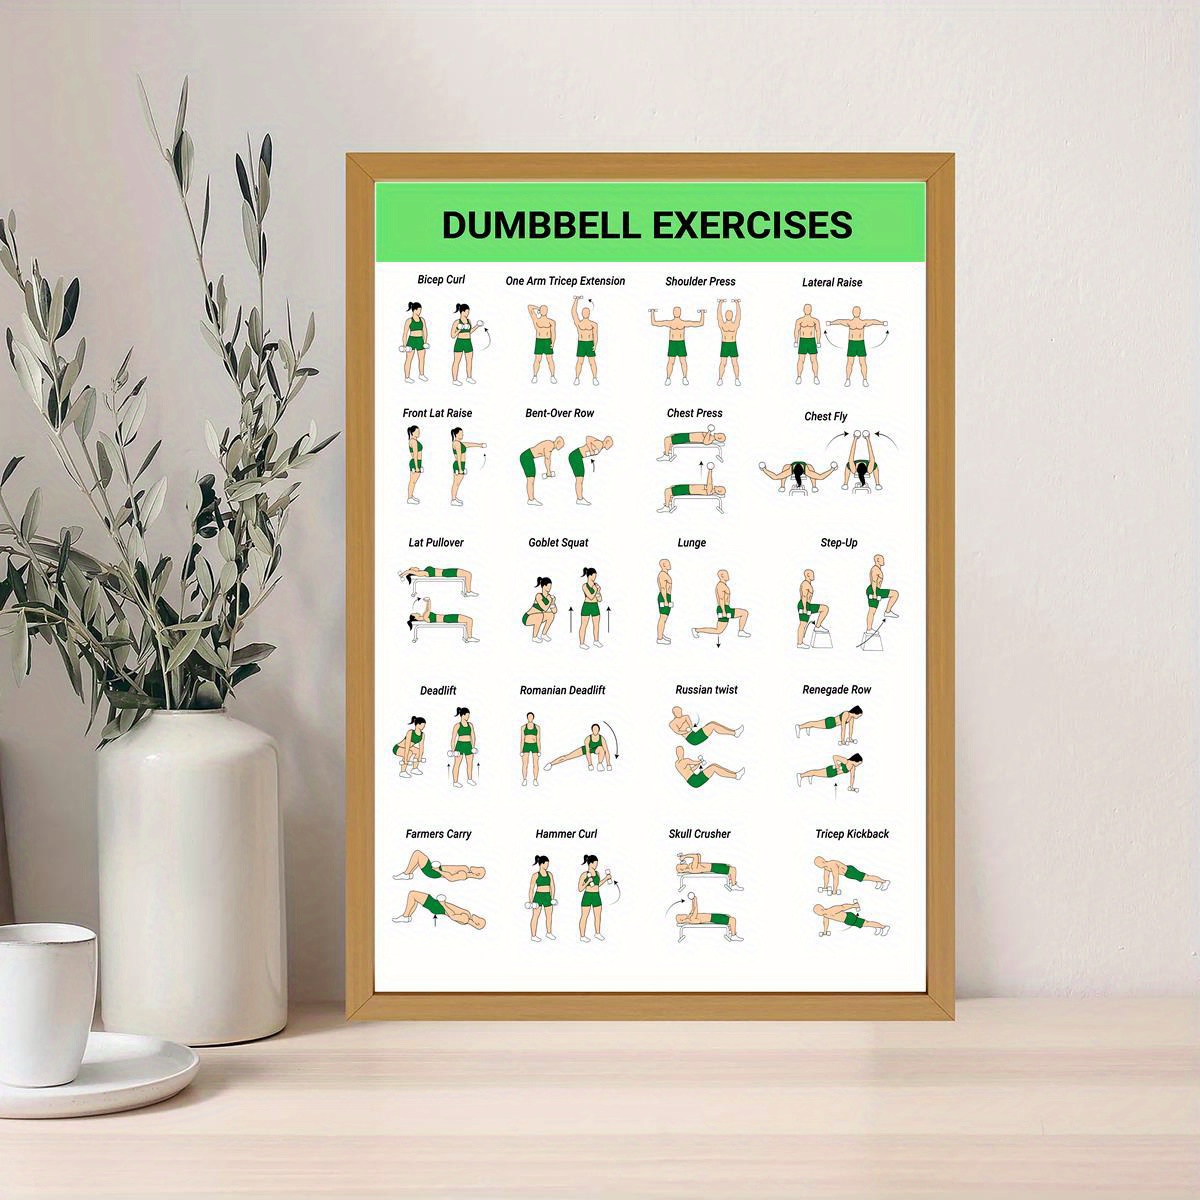 dumbbell exercise chart canvas poster waterproof art print for home gym office living room bedroom cafe bar decor art deco modern style frameless wall hanging decor indoor outdoor use